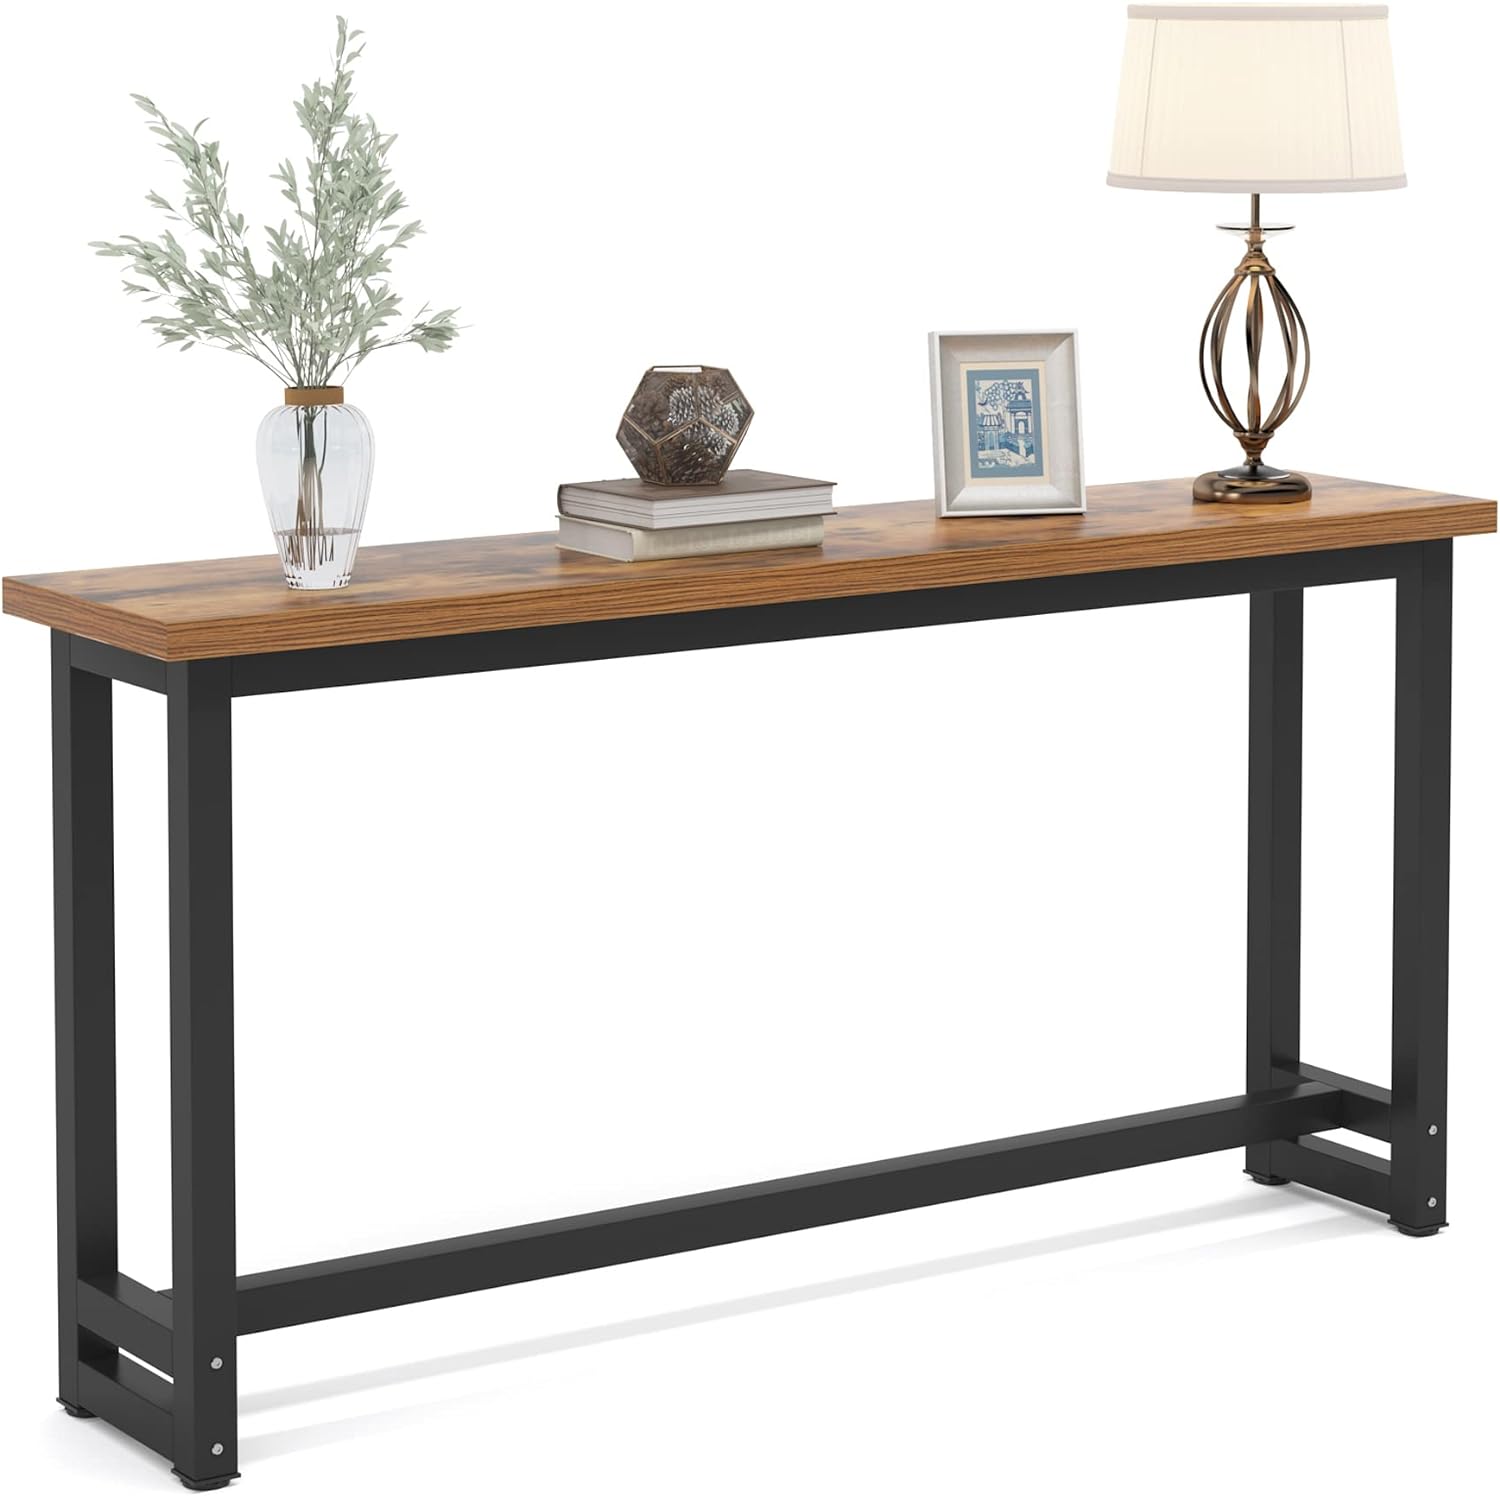 Console Table for Living Room, Meal Bench for Kitchen, Sofa End Table, Entryway and Hallway Console Table